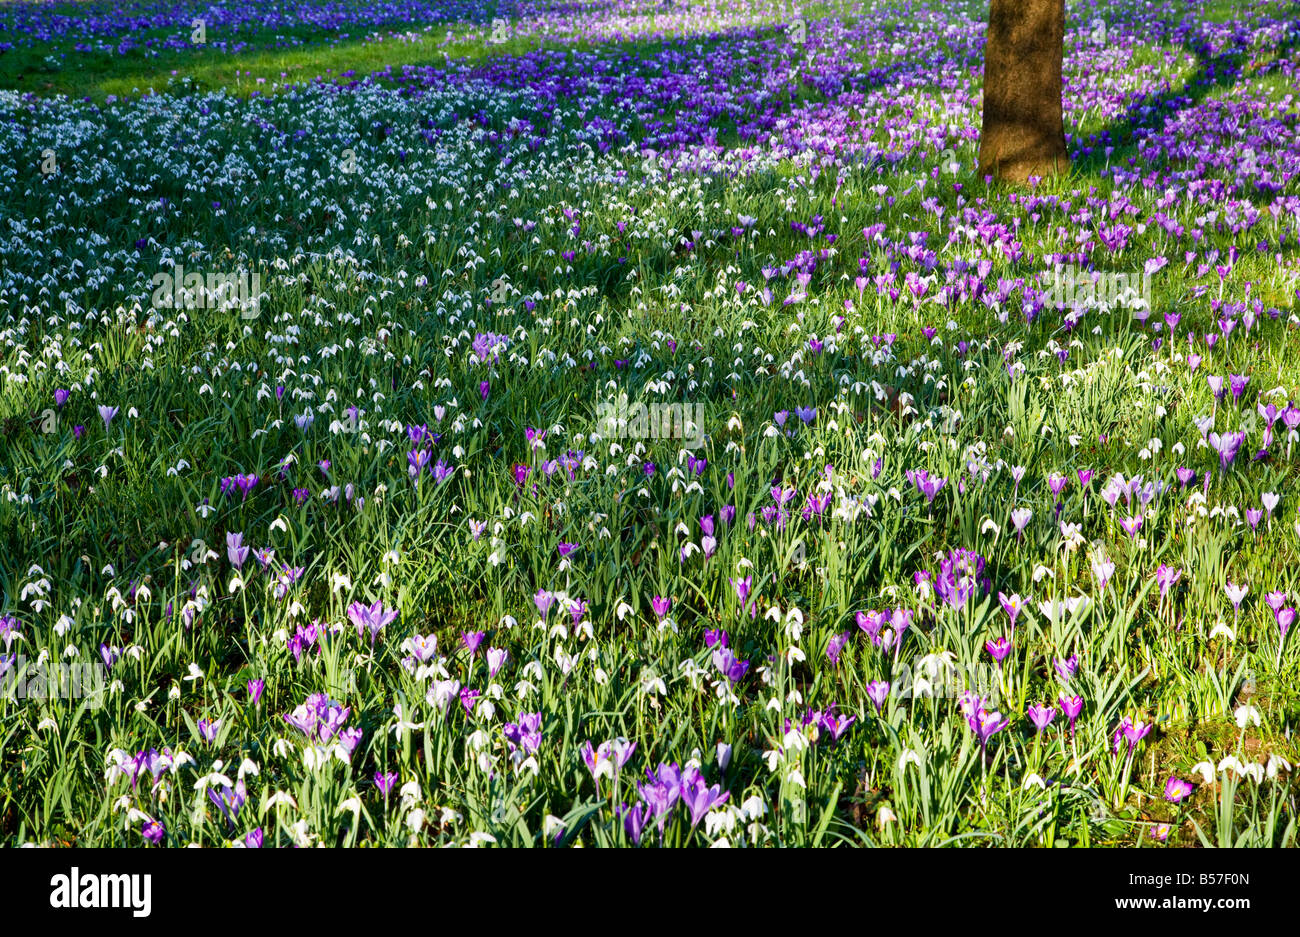 Snowdrops, galanthus nivalis, and purple crocuses growing in a garden lawn in early spring Stock Photo